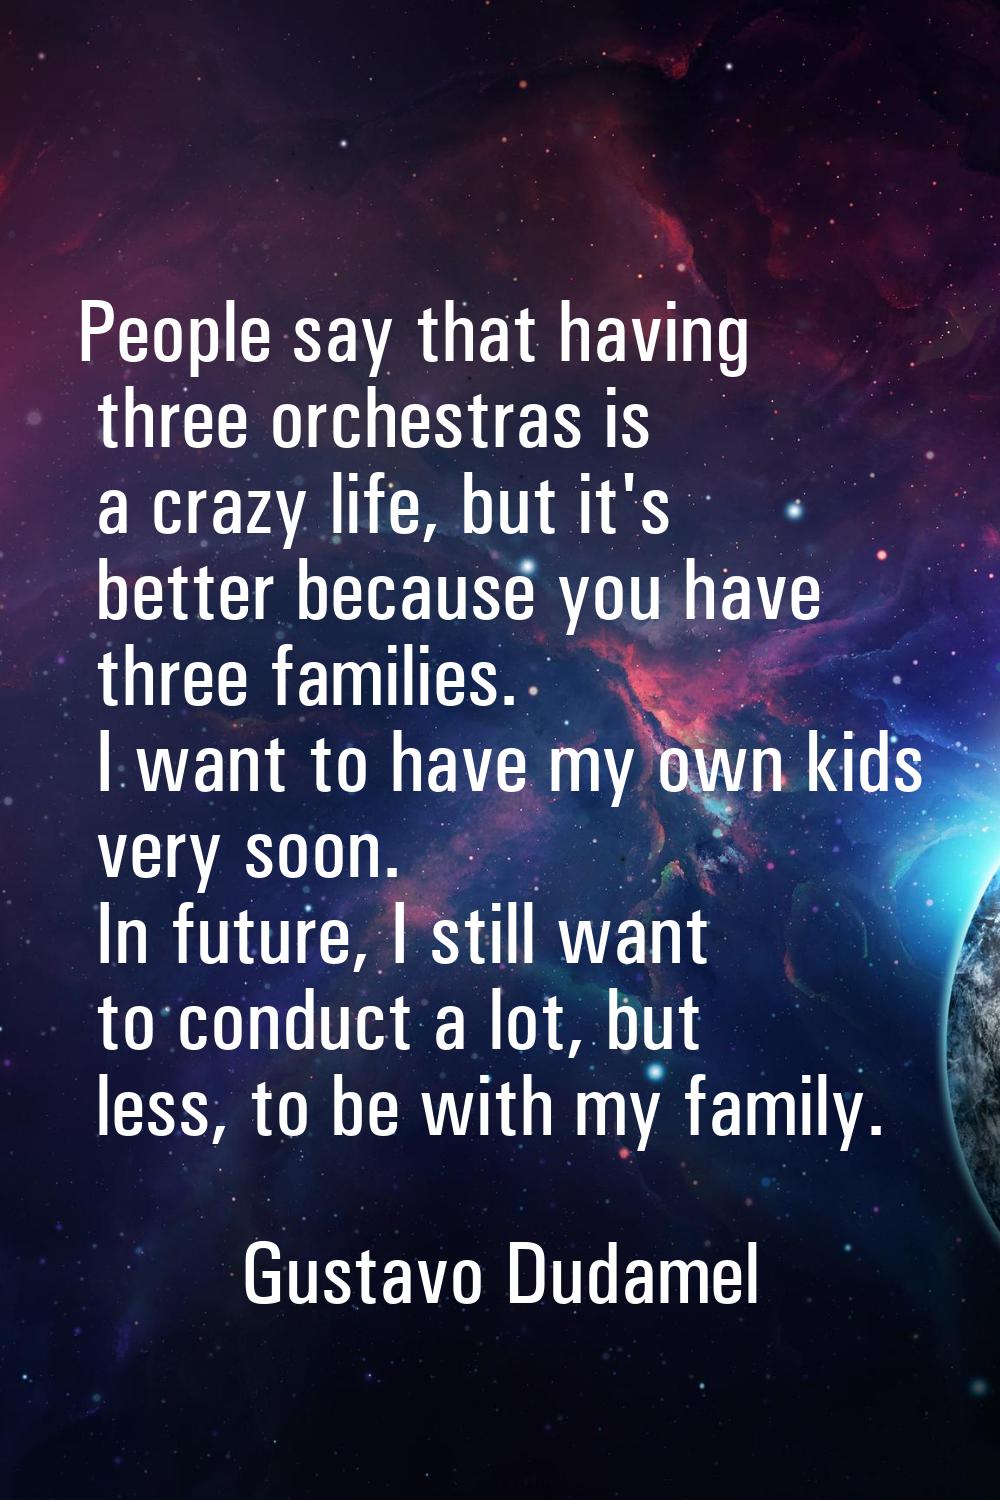 People say that having three orchestras is a crazy life, but it's better because you have three fam